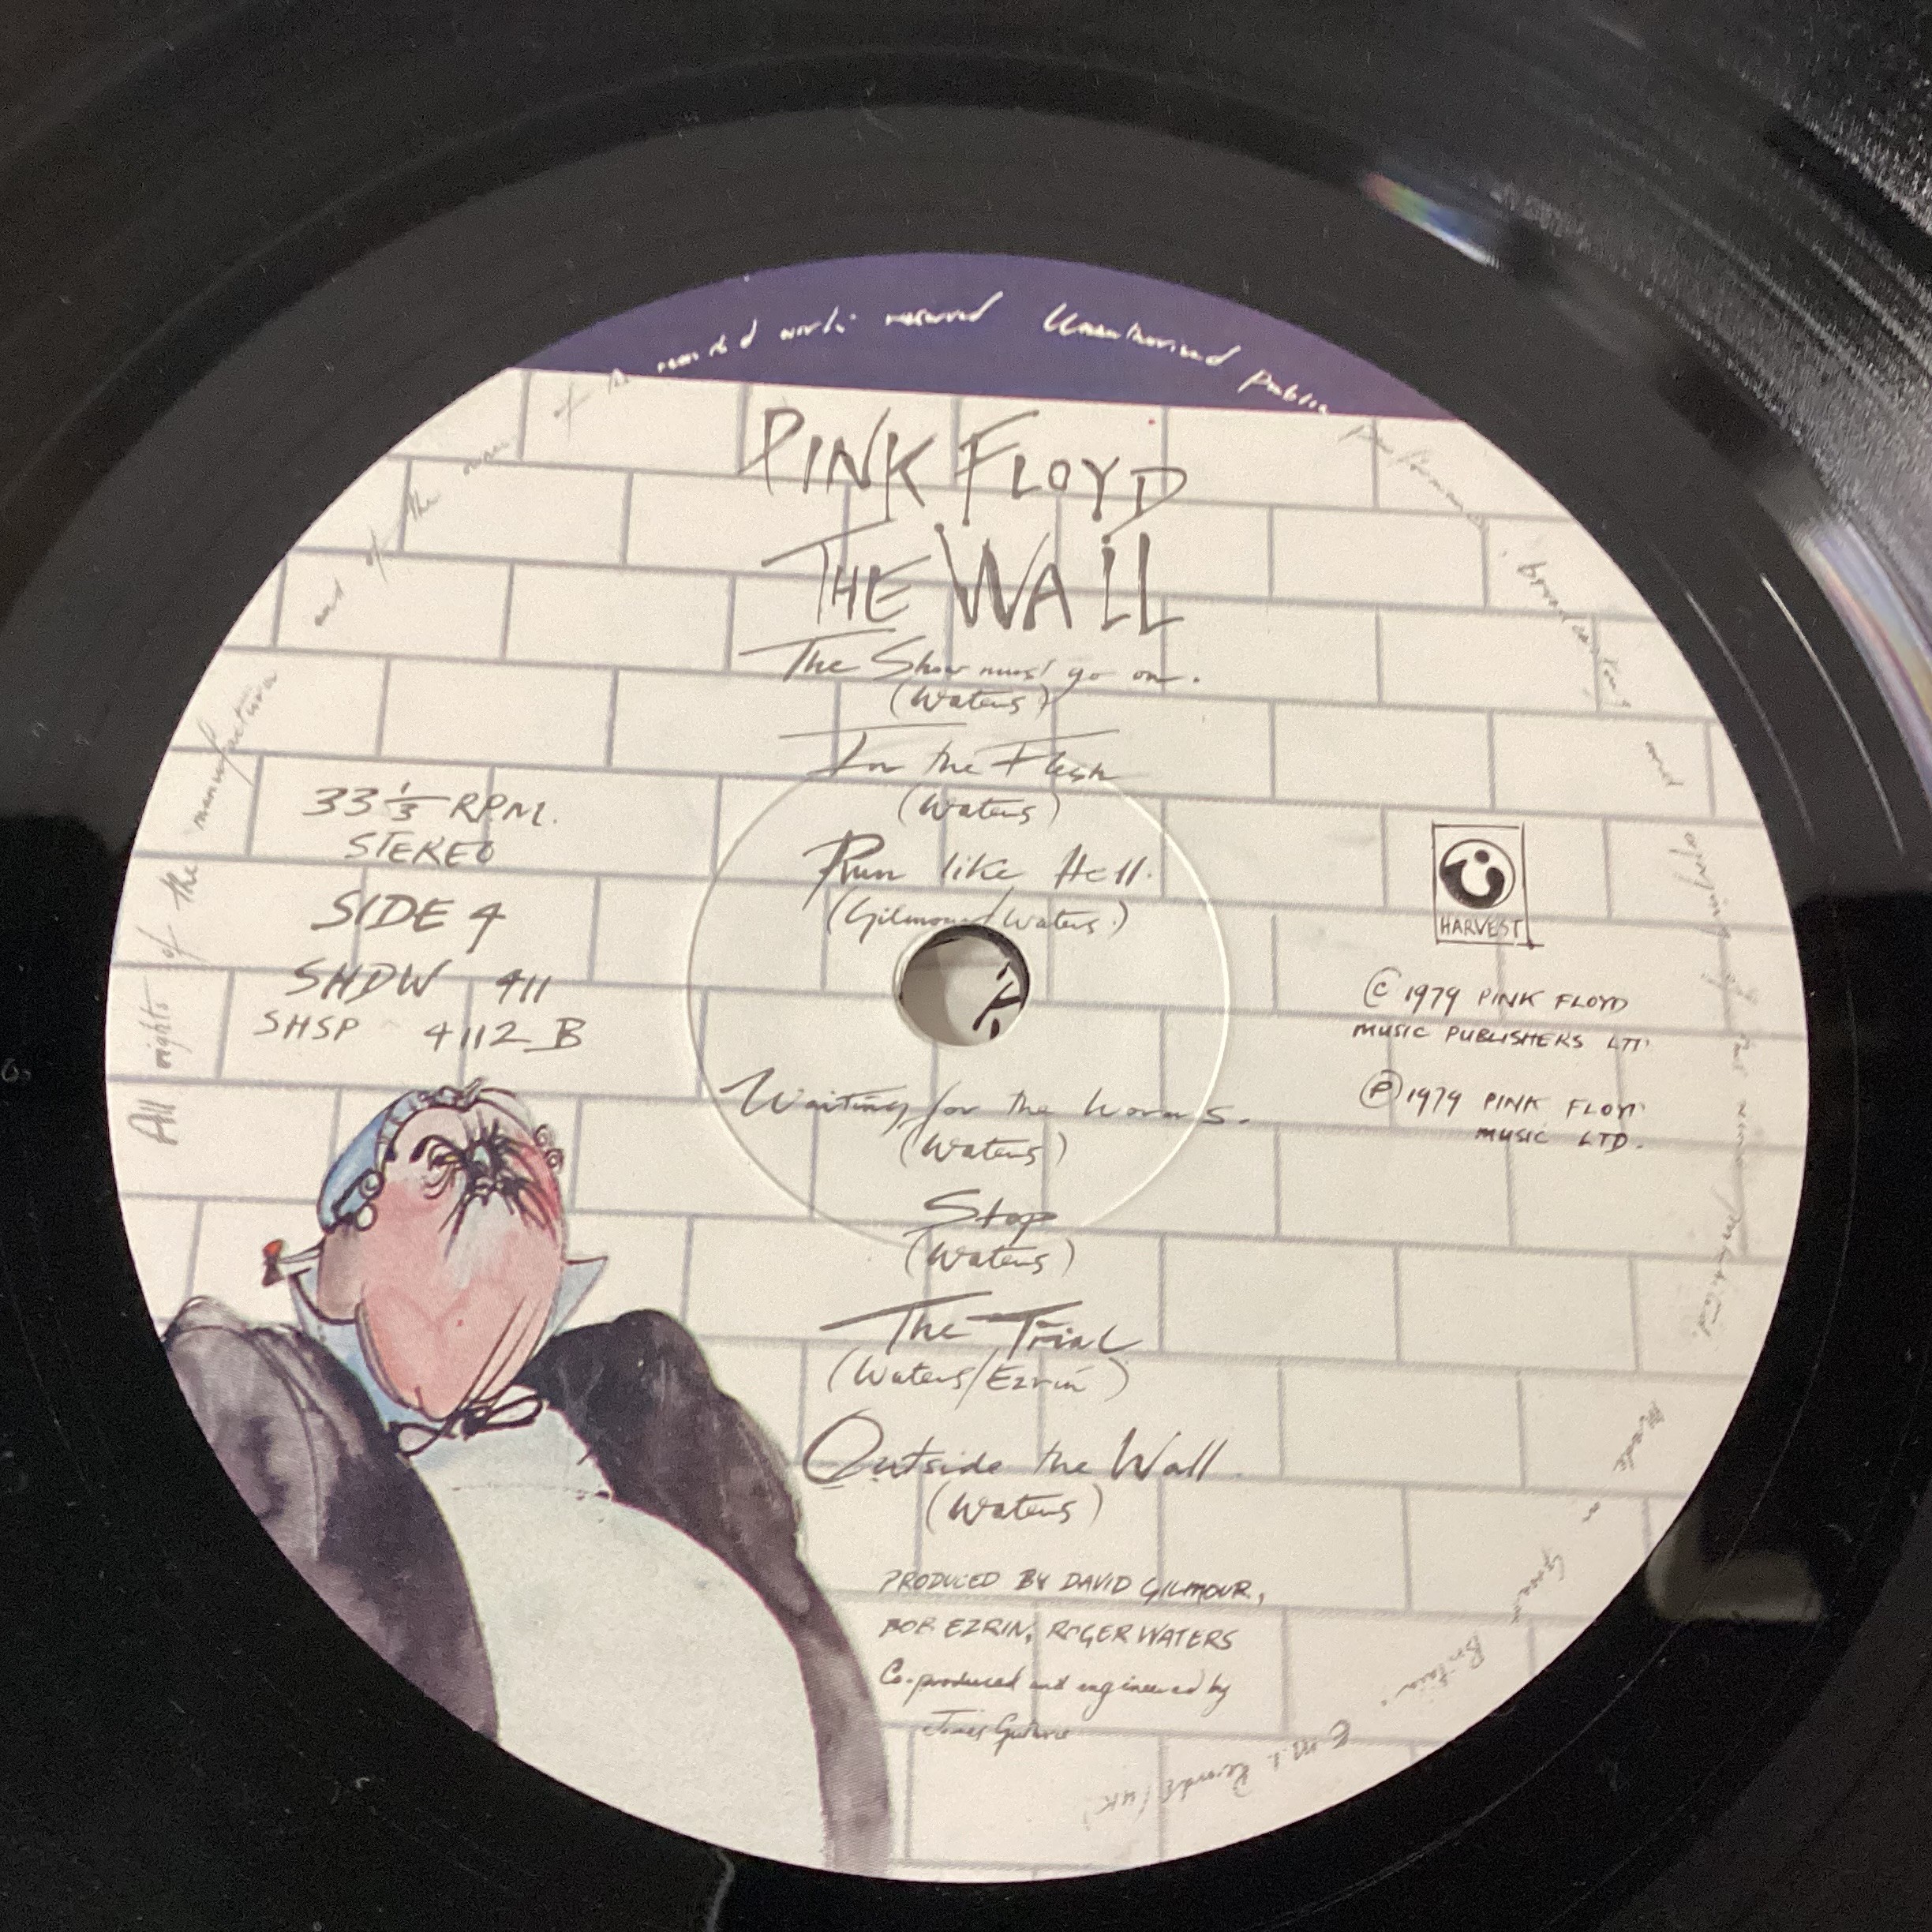 PINK FLOYD VINYL LP RECORDS X 2. Copies here include ‘The Wall’ double album on Harvest SHDW 411 - Image 6 of 9